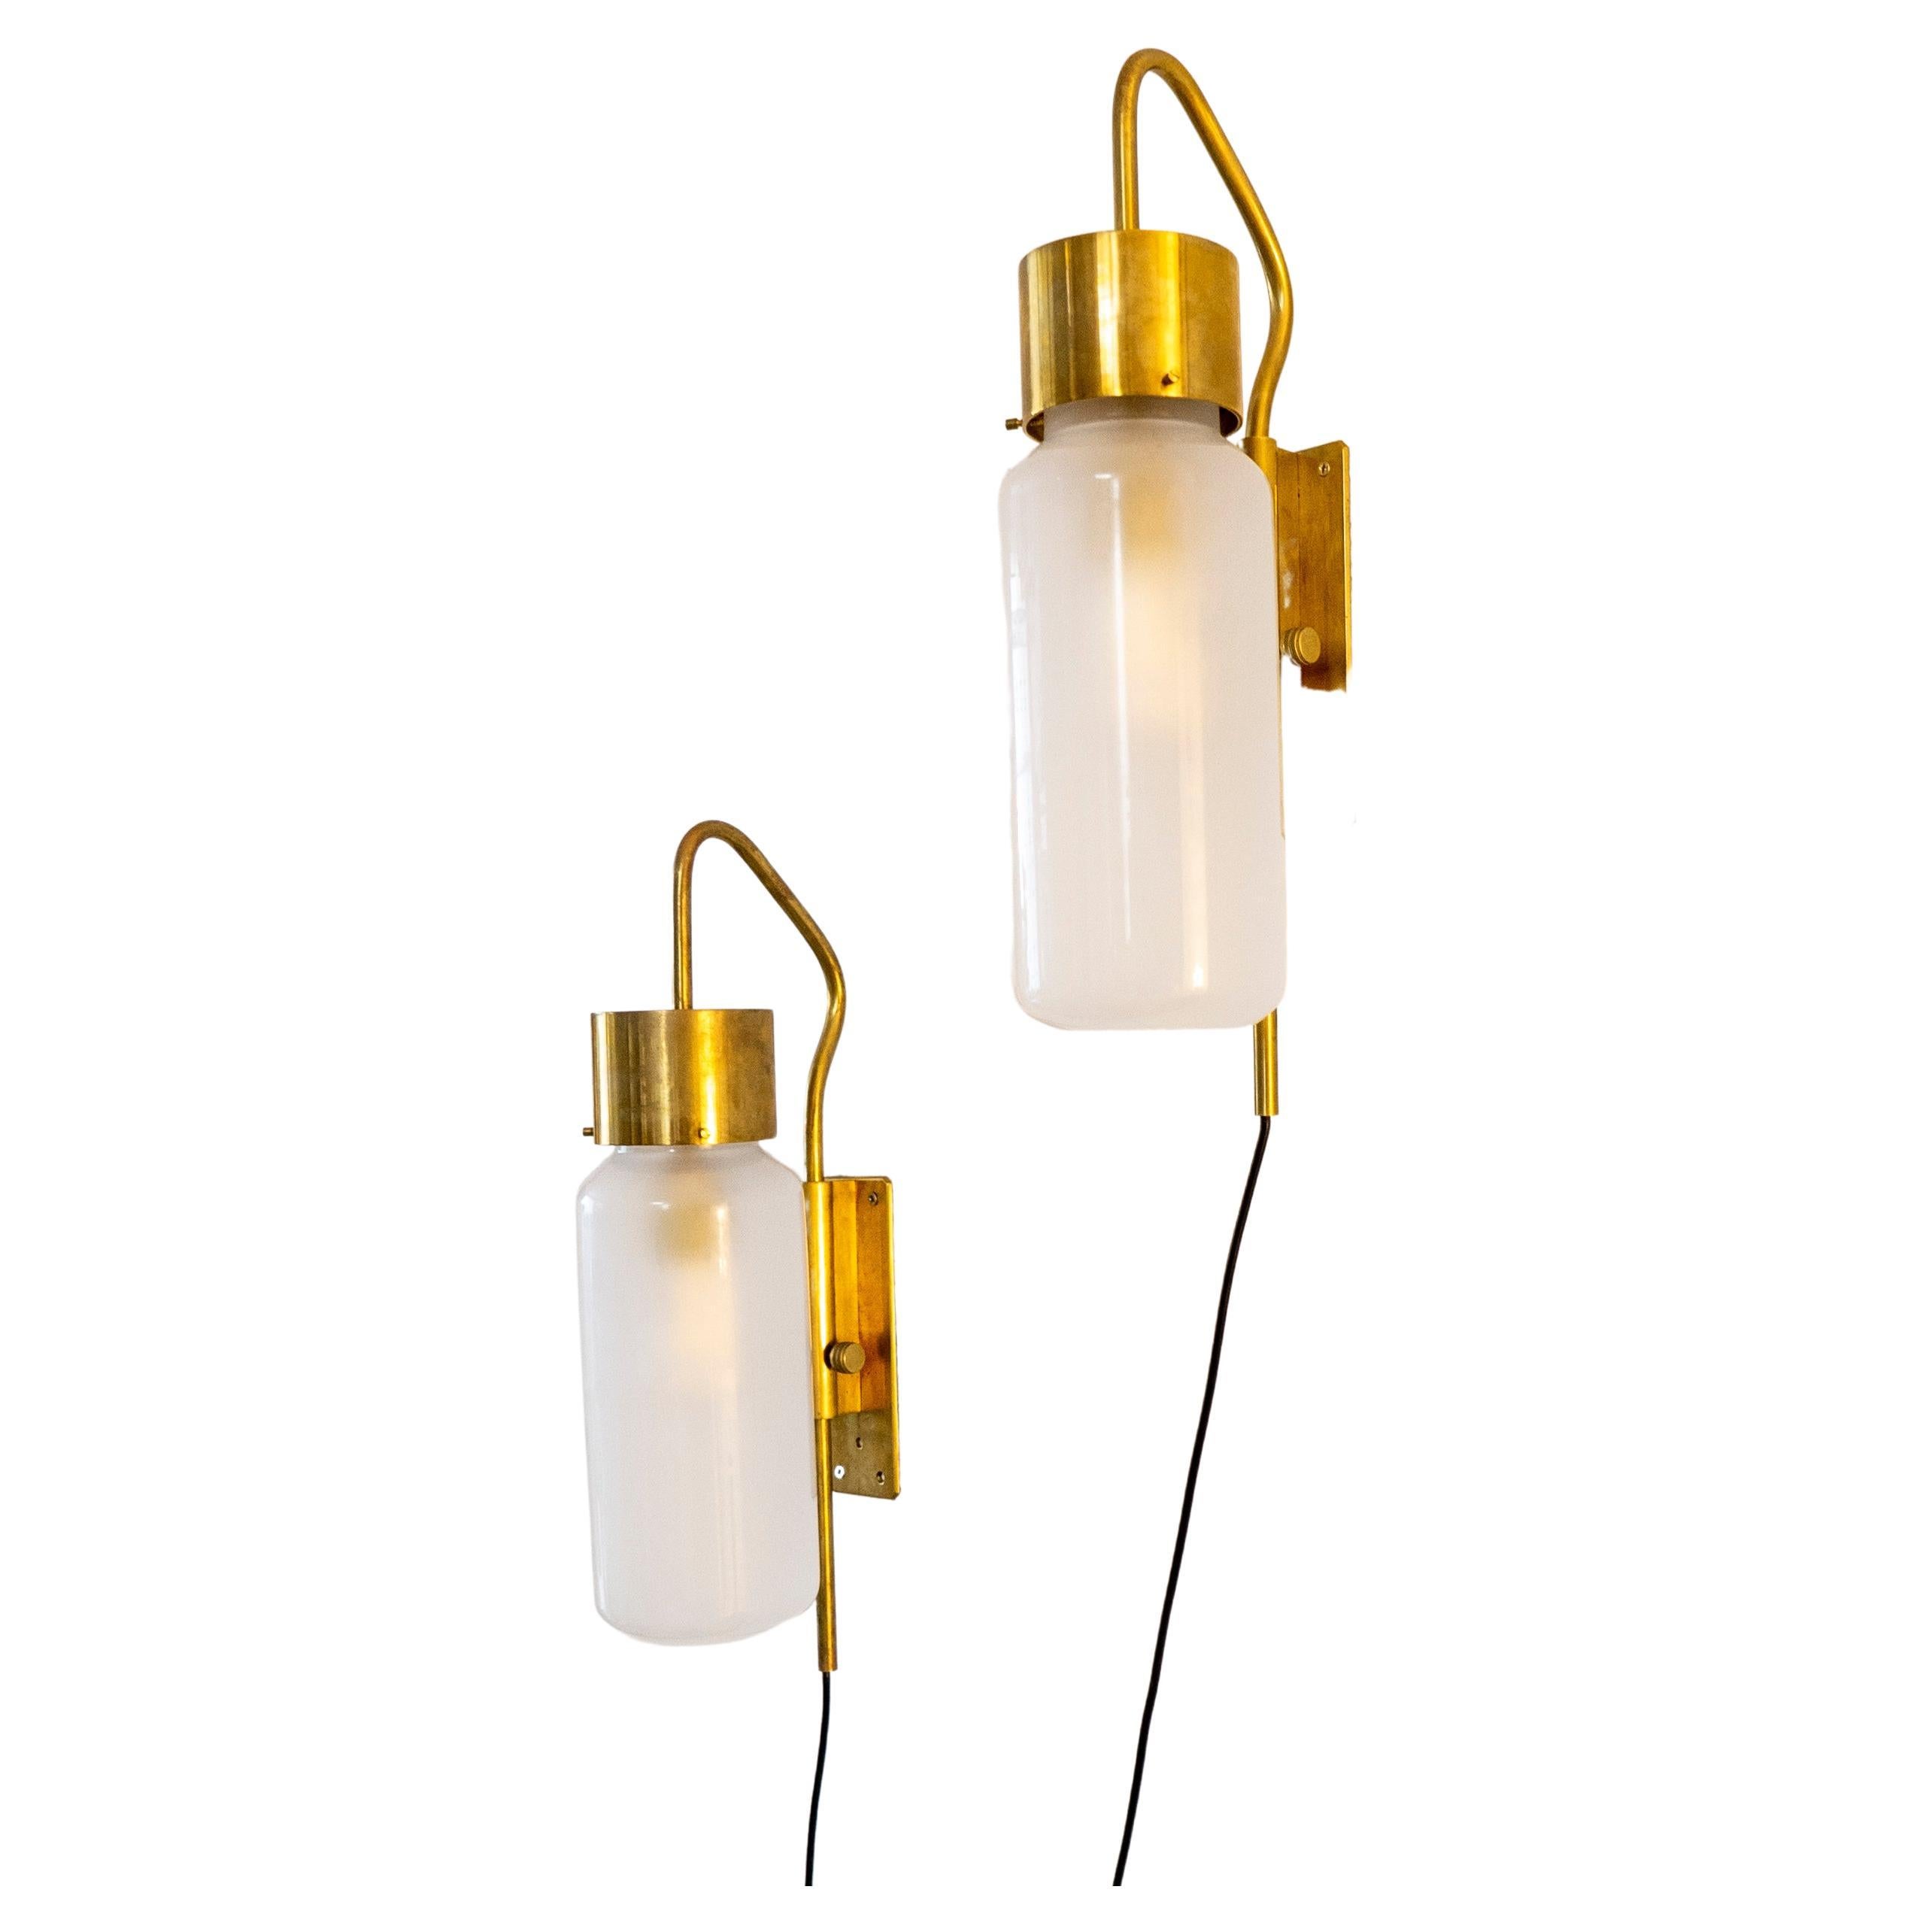 Pair of Vintage LP10 "Bidoni" Wall Lamps by Luigi Caccia Dominioni for Azucena For Sale